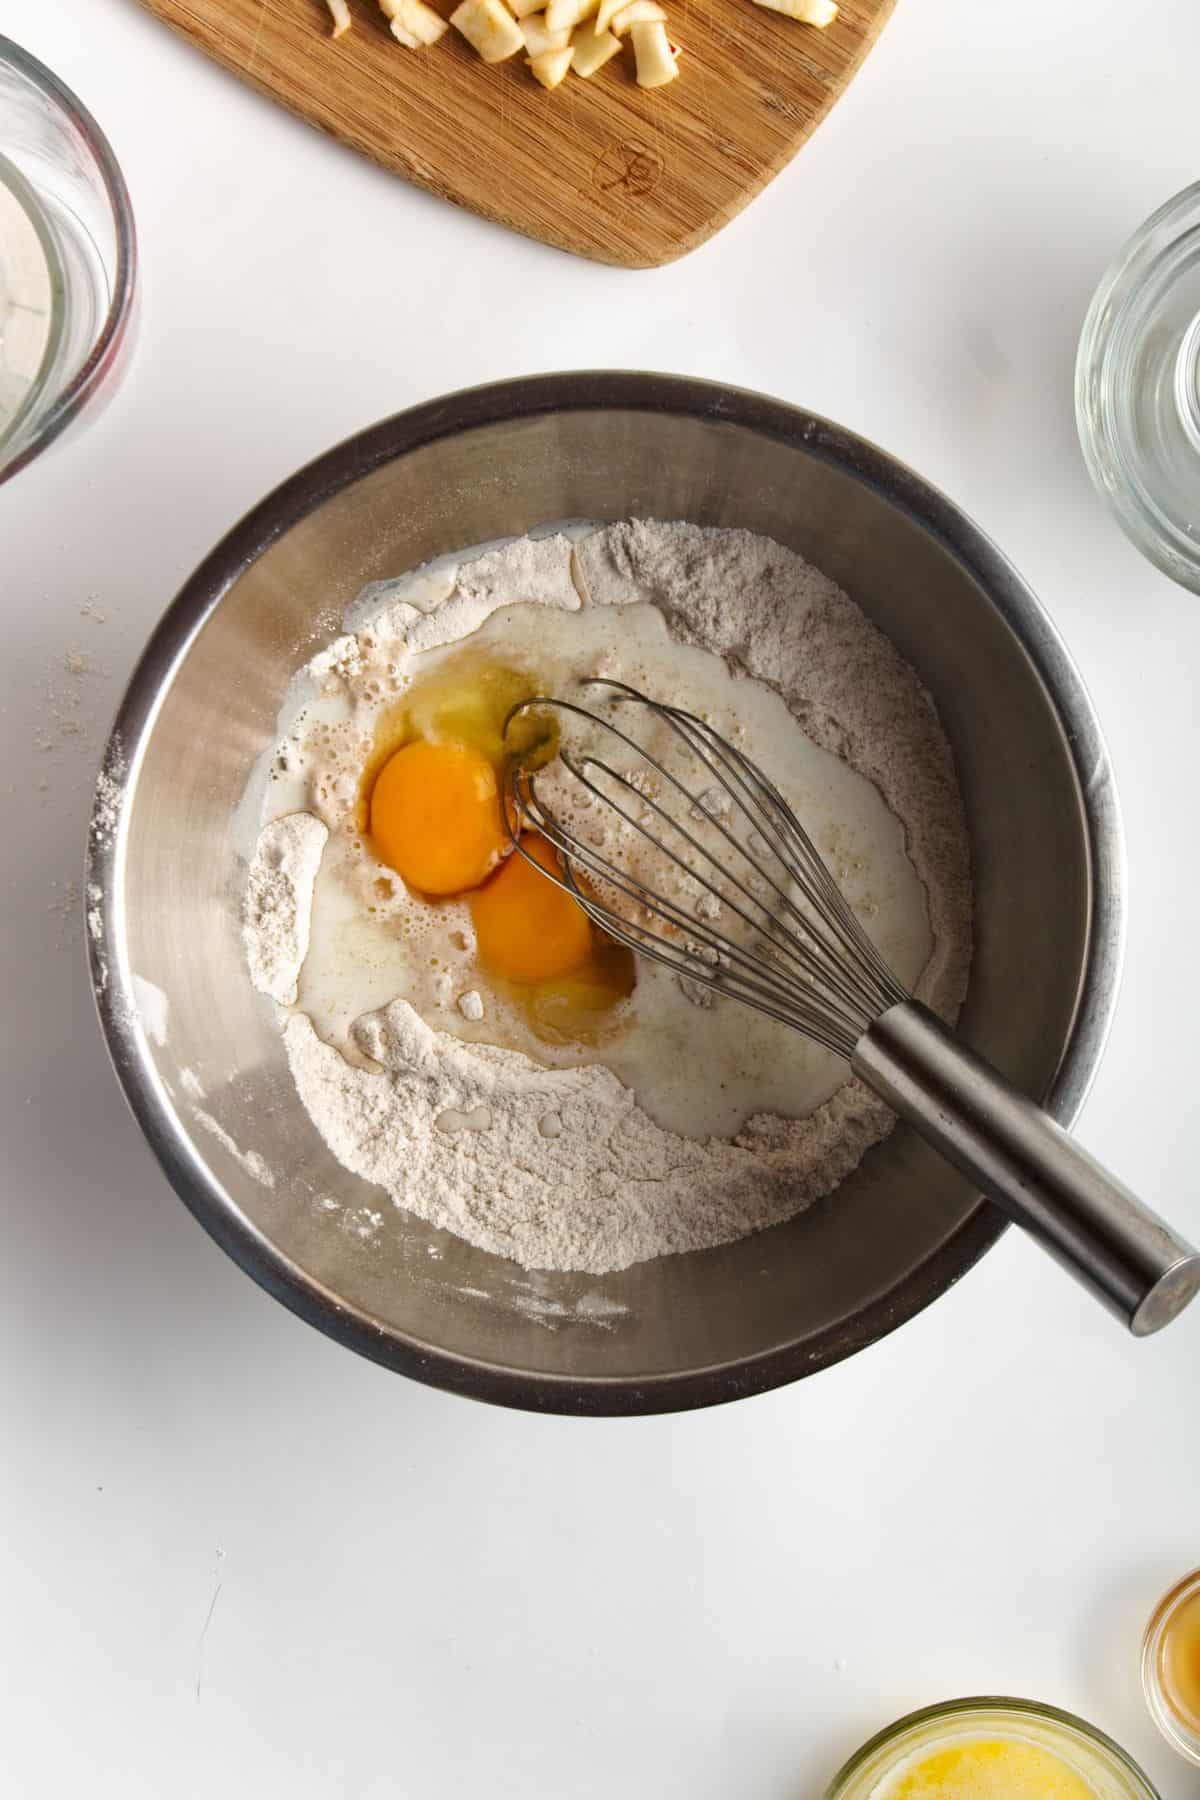 Flour, milk, and eggs in a stainless bowl.